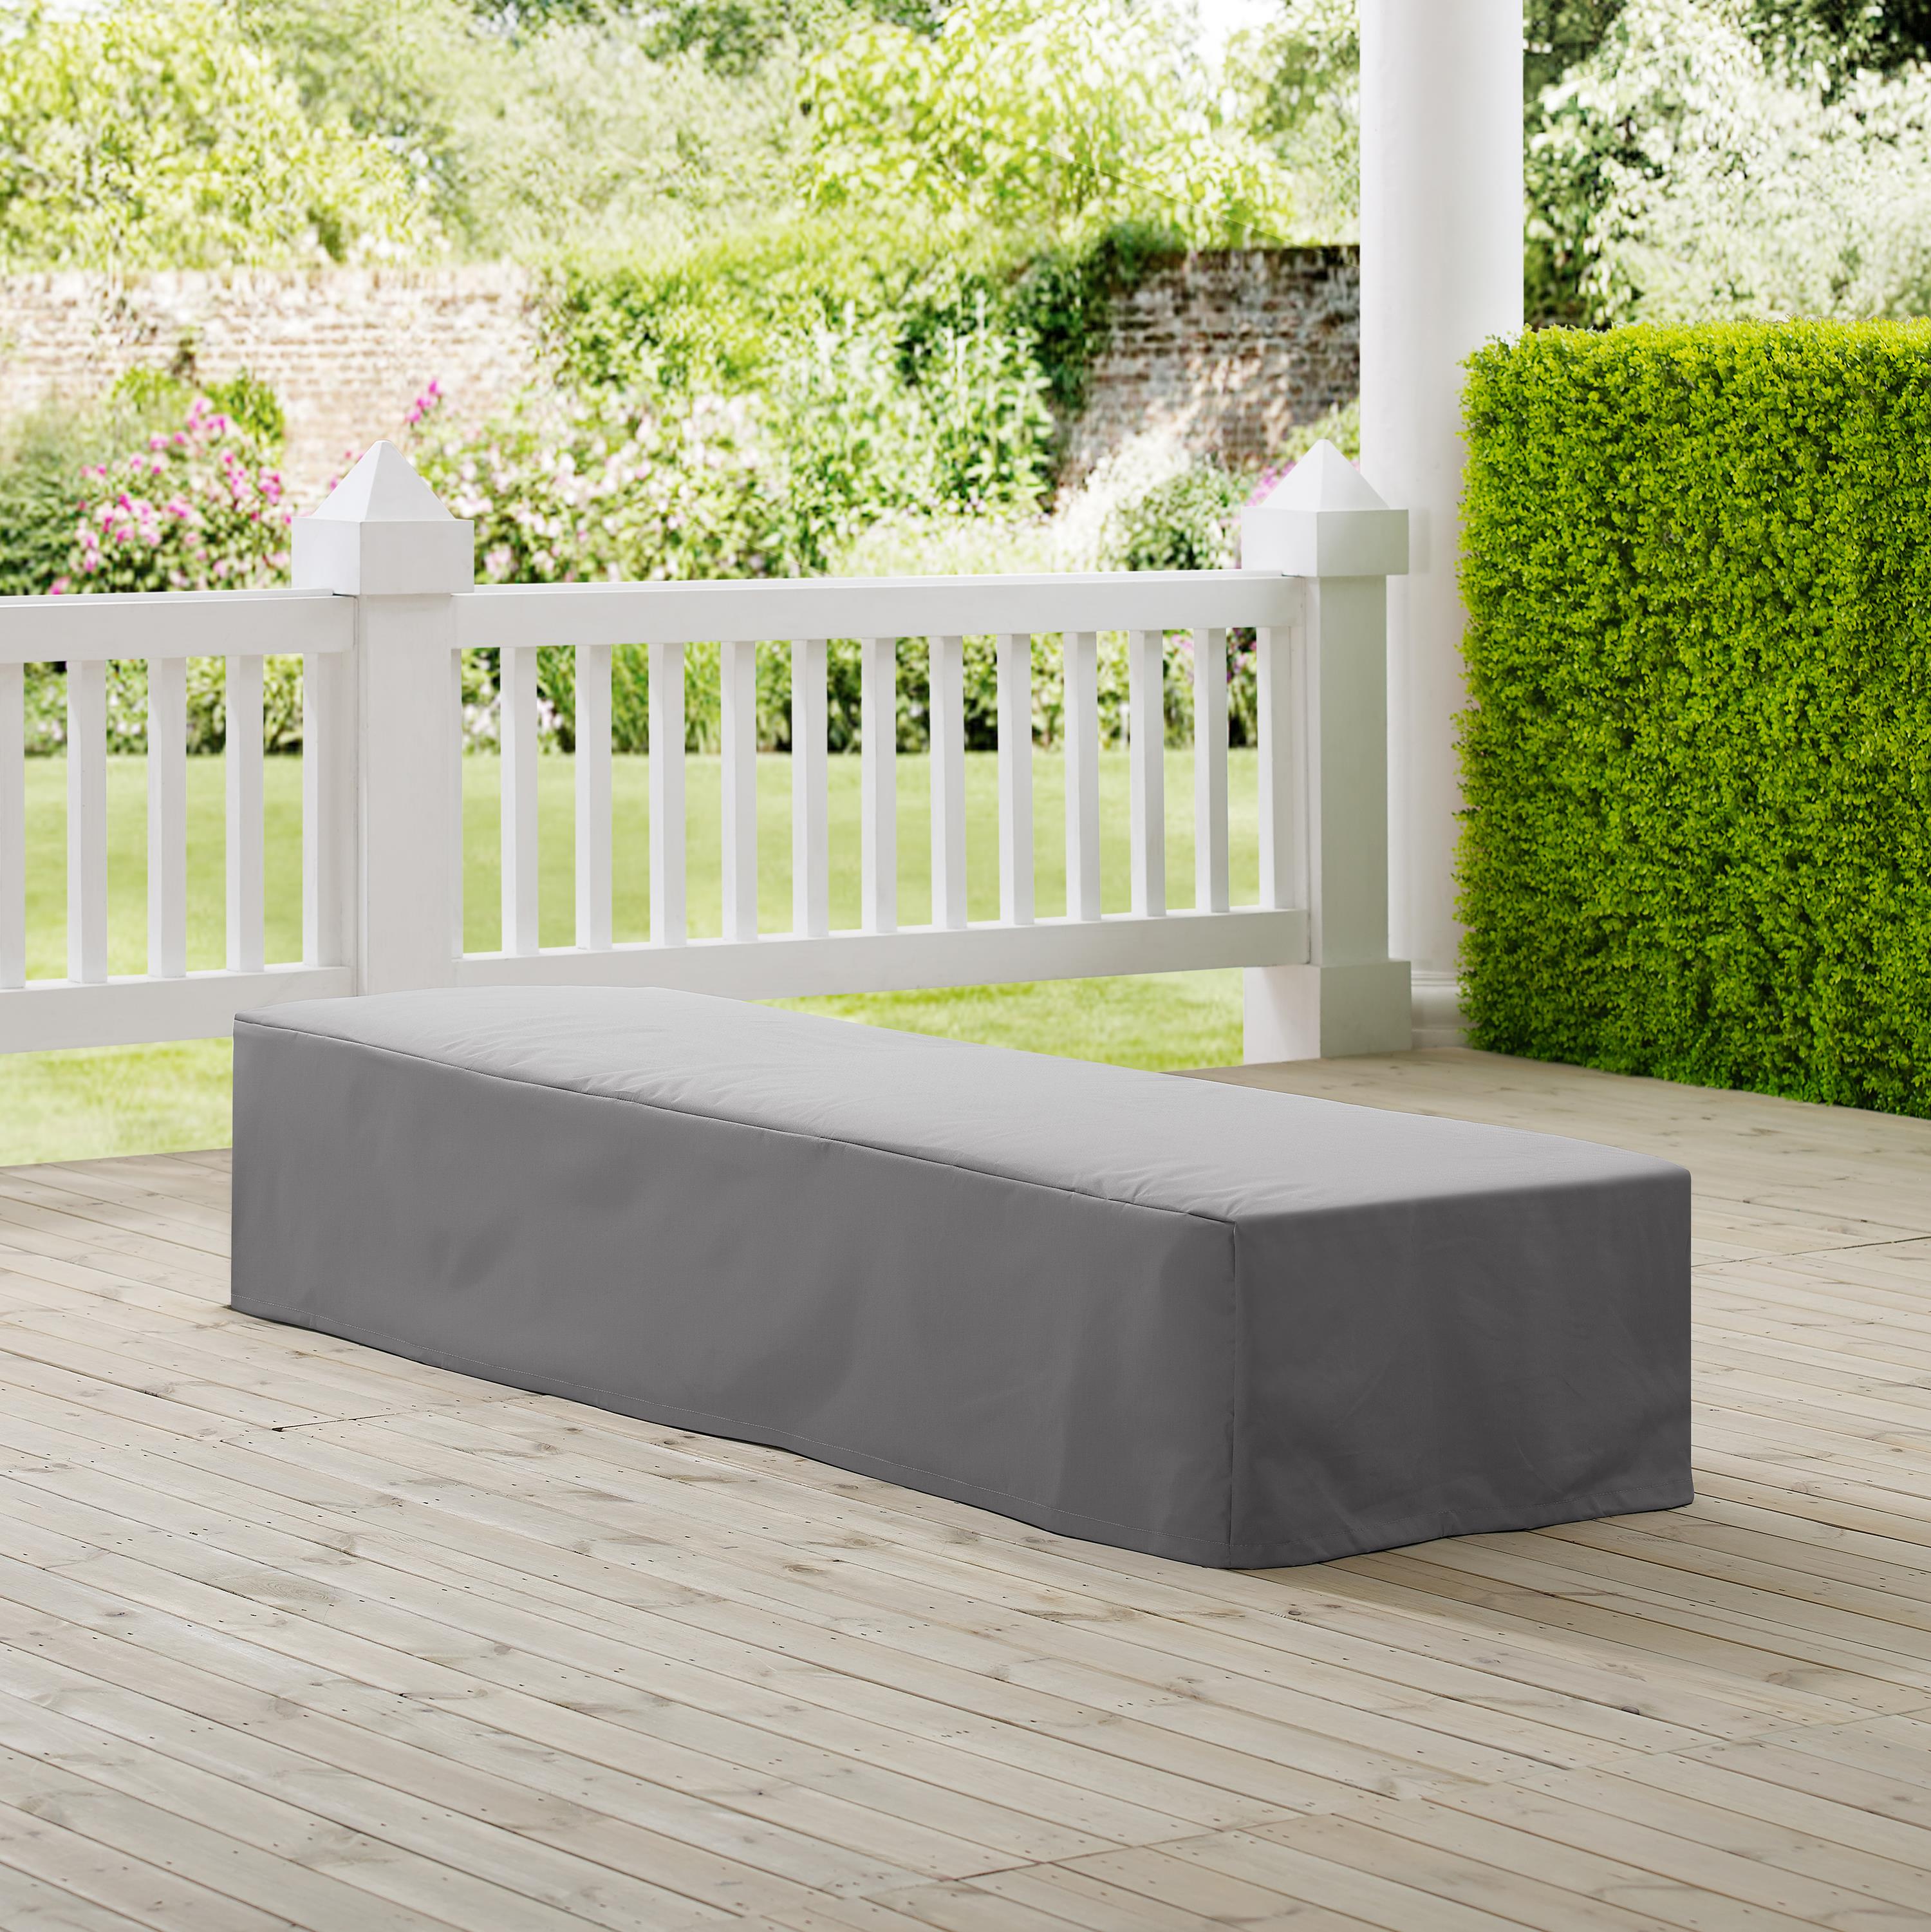 Crosley Furniture Patio Polyester Fabric Chaise Lounge Cover in Gray - image 5 of 7